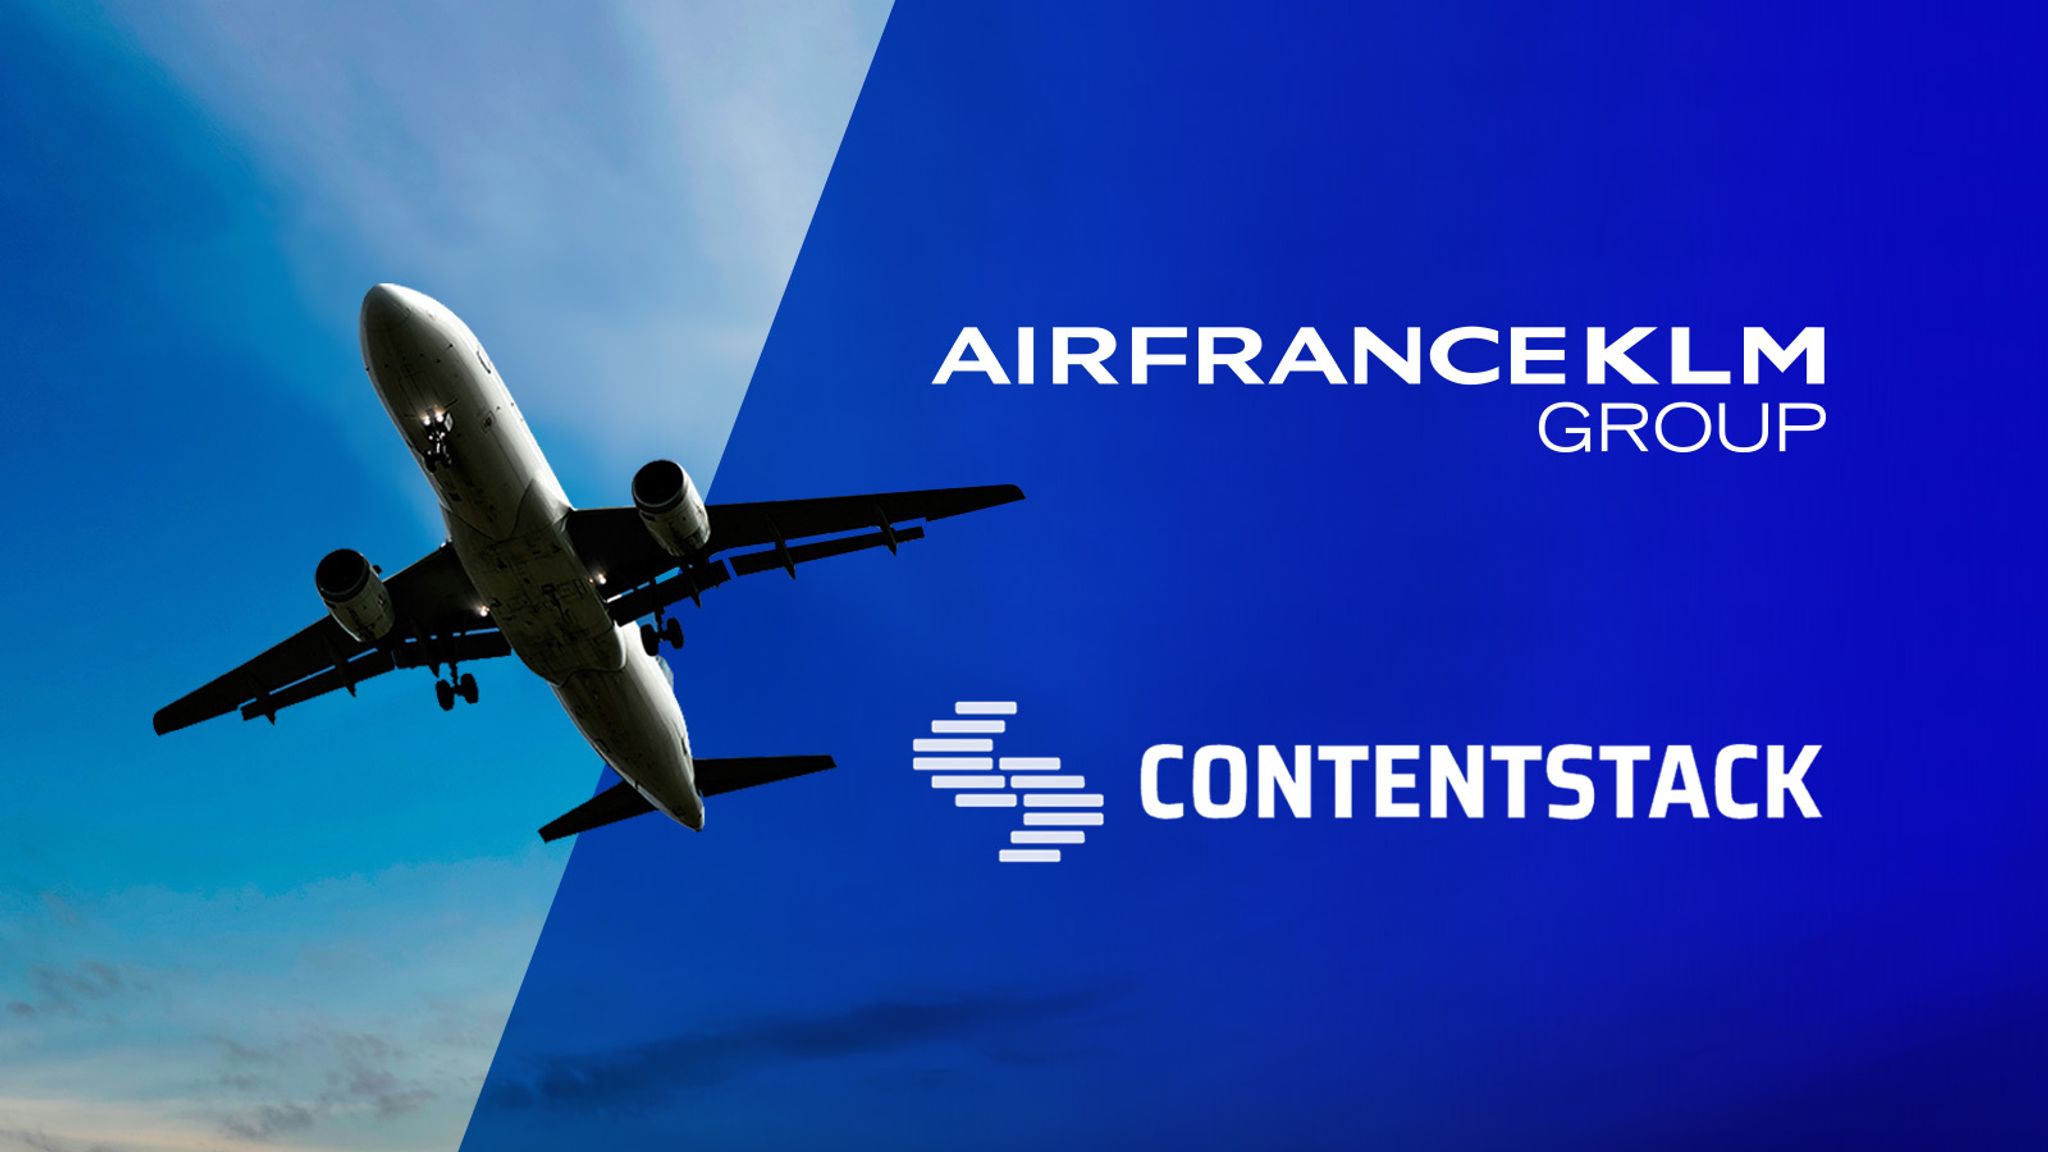 Plane flying in sky with logos of AirFrance KLM and Contentstack